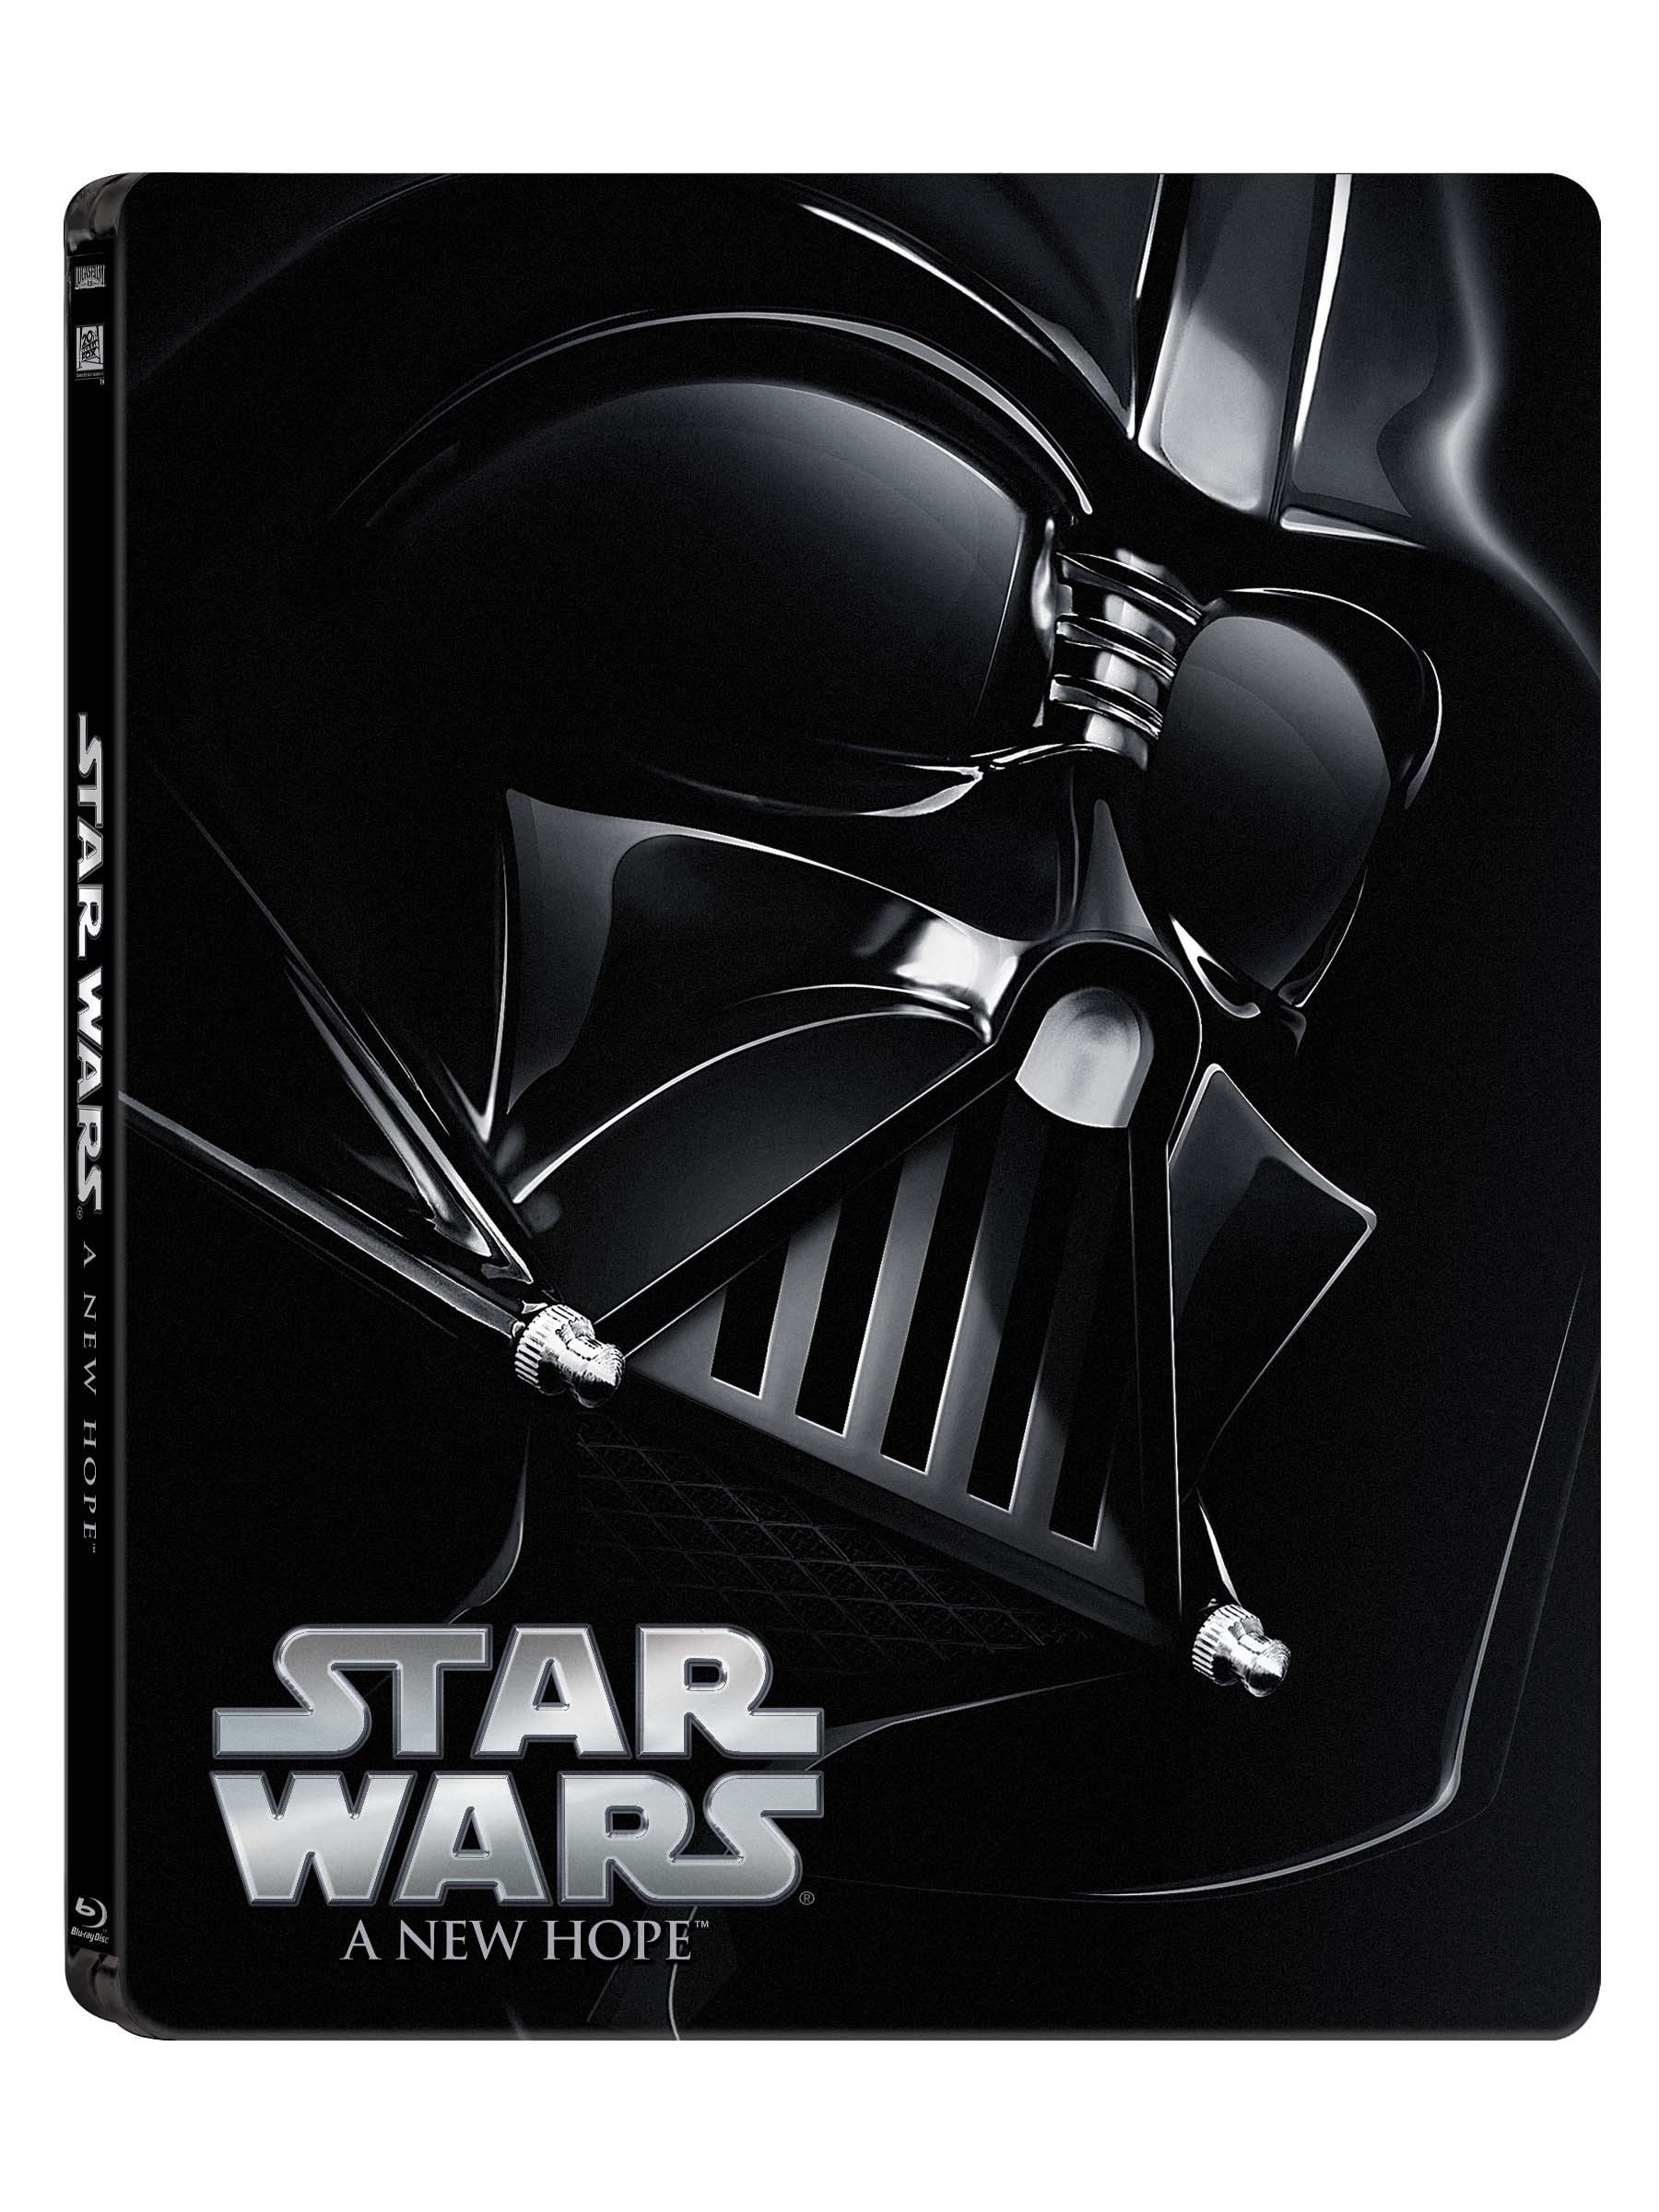 star-wars-episode-4-a-new-hope-steelbook-movie-purchase-or-watch